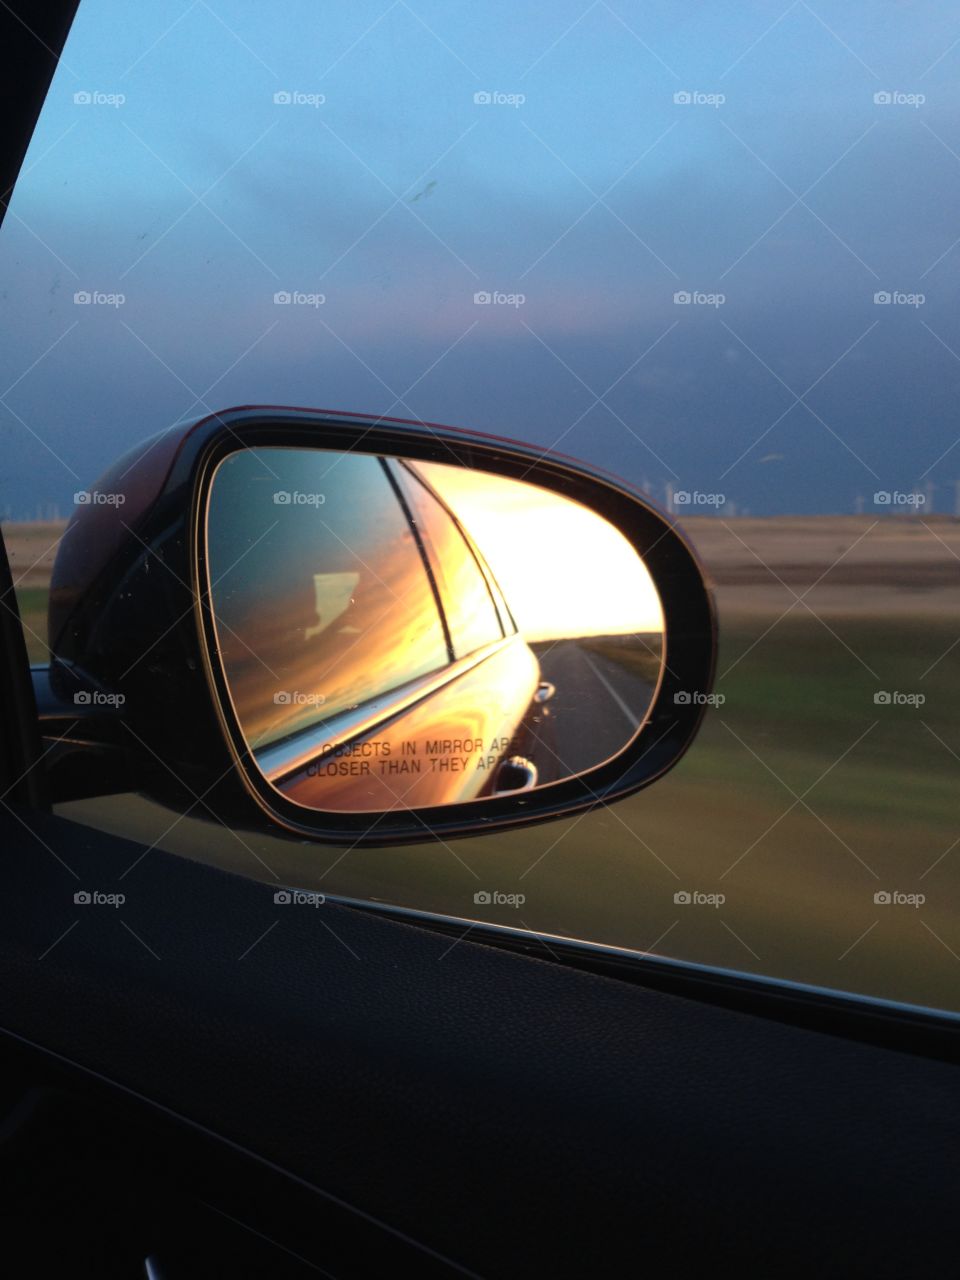 Montana sunset in the rear view mirror